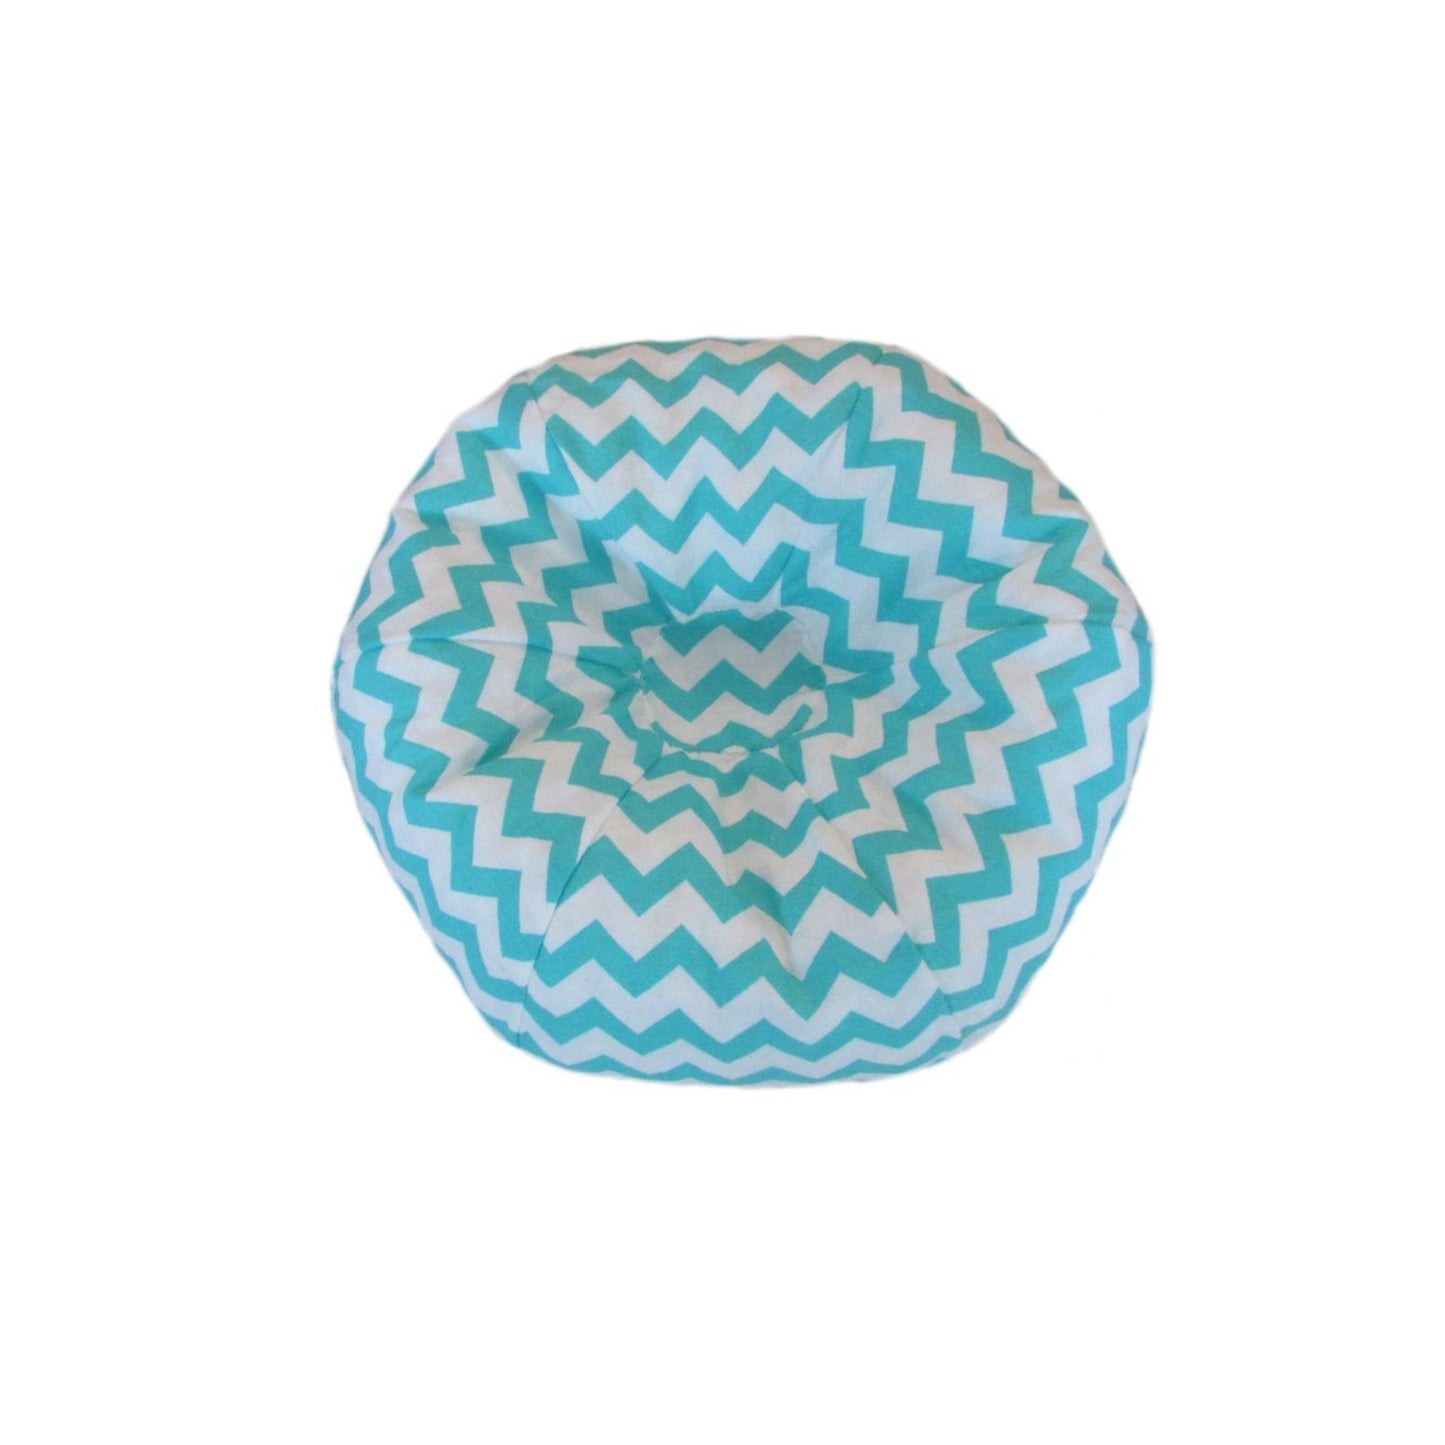 Turquoise Chevron Doll Bean Bag Chair for 18-inch dolls without doll